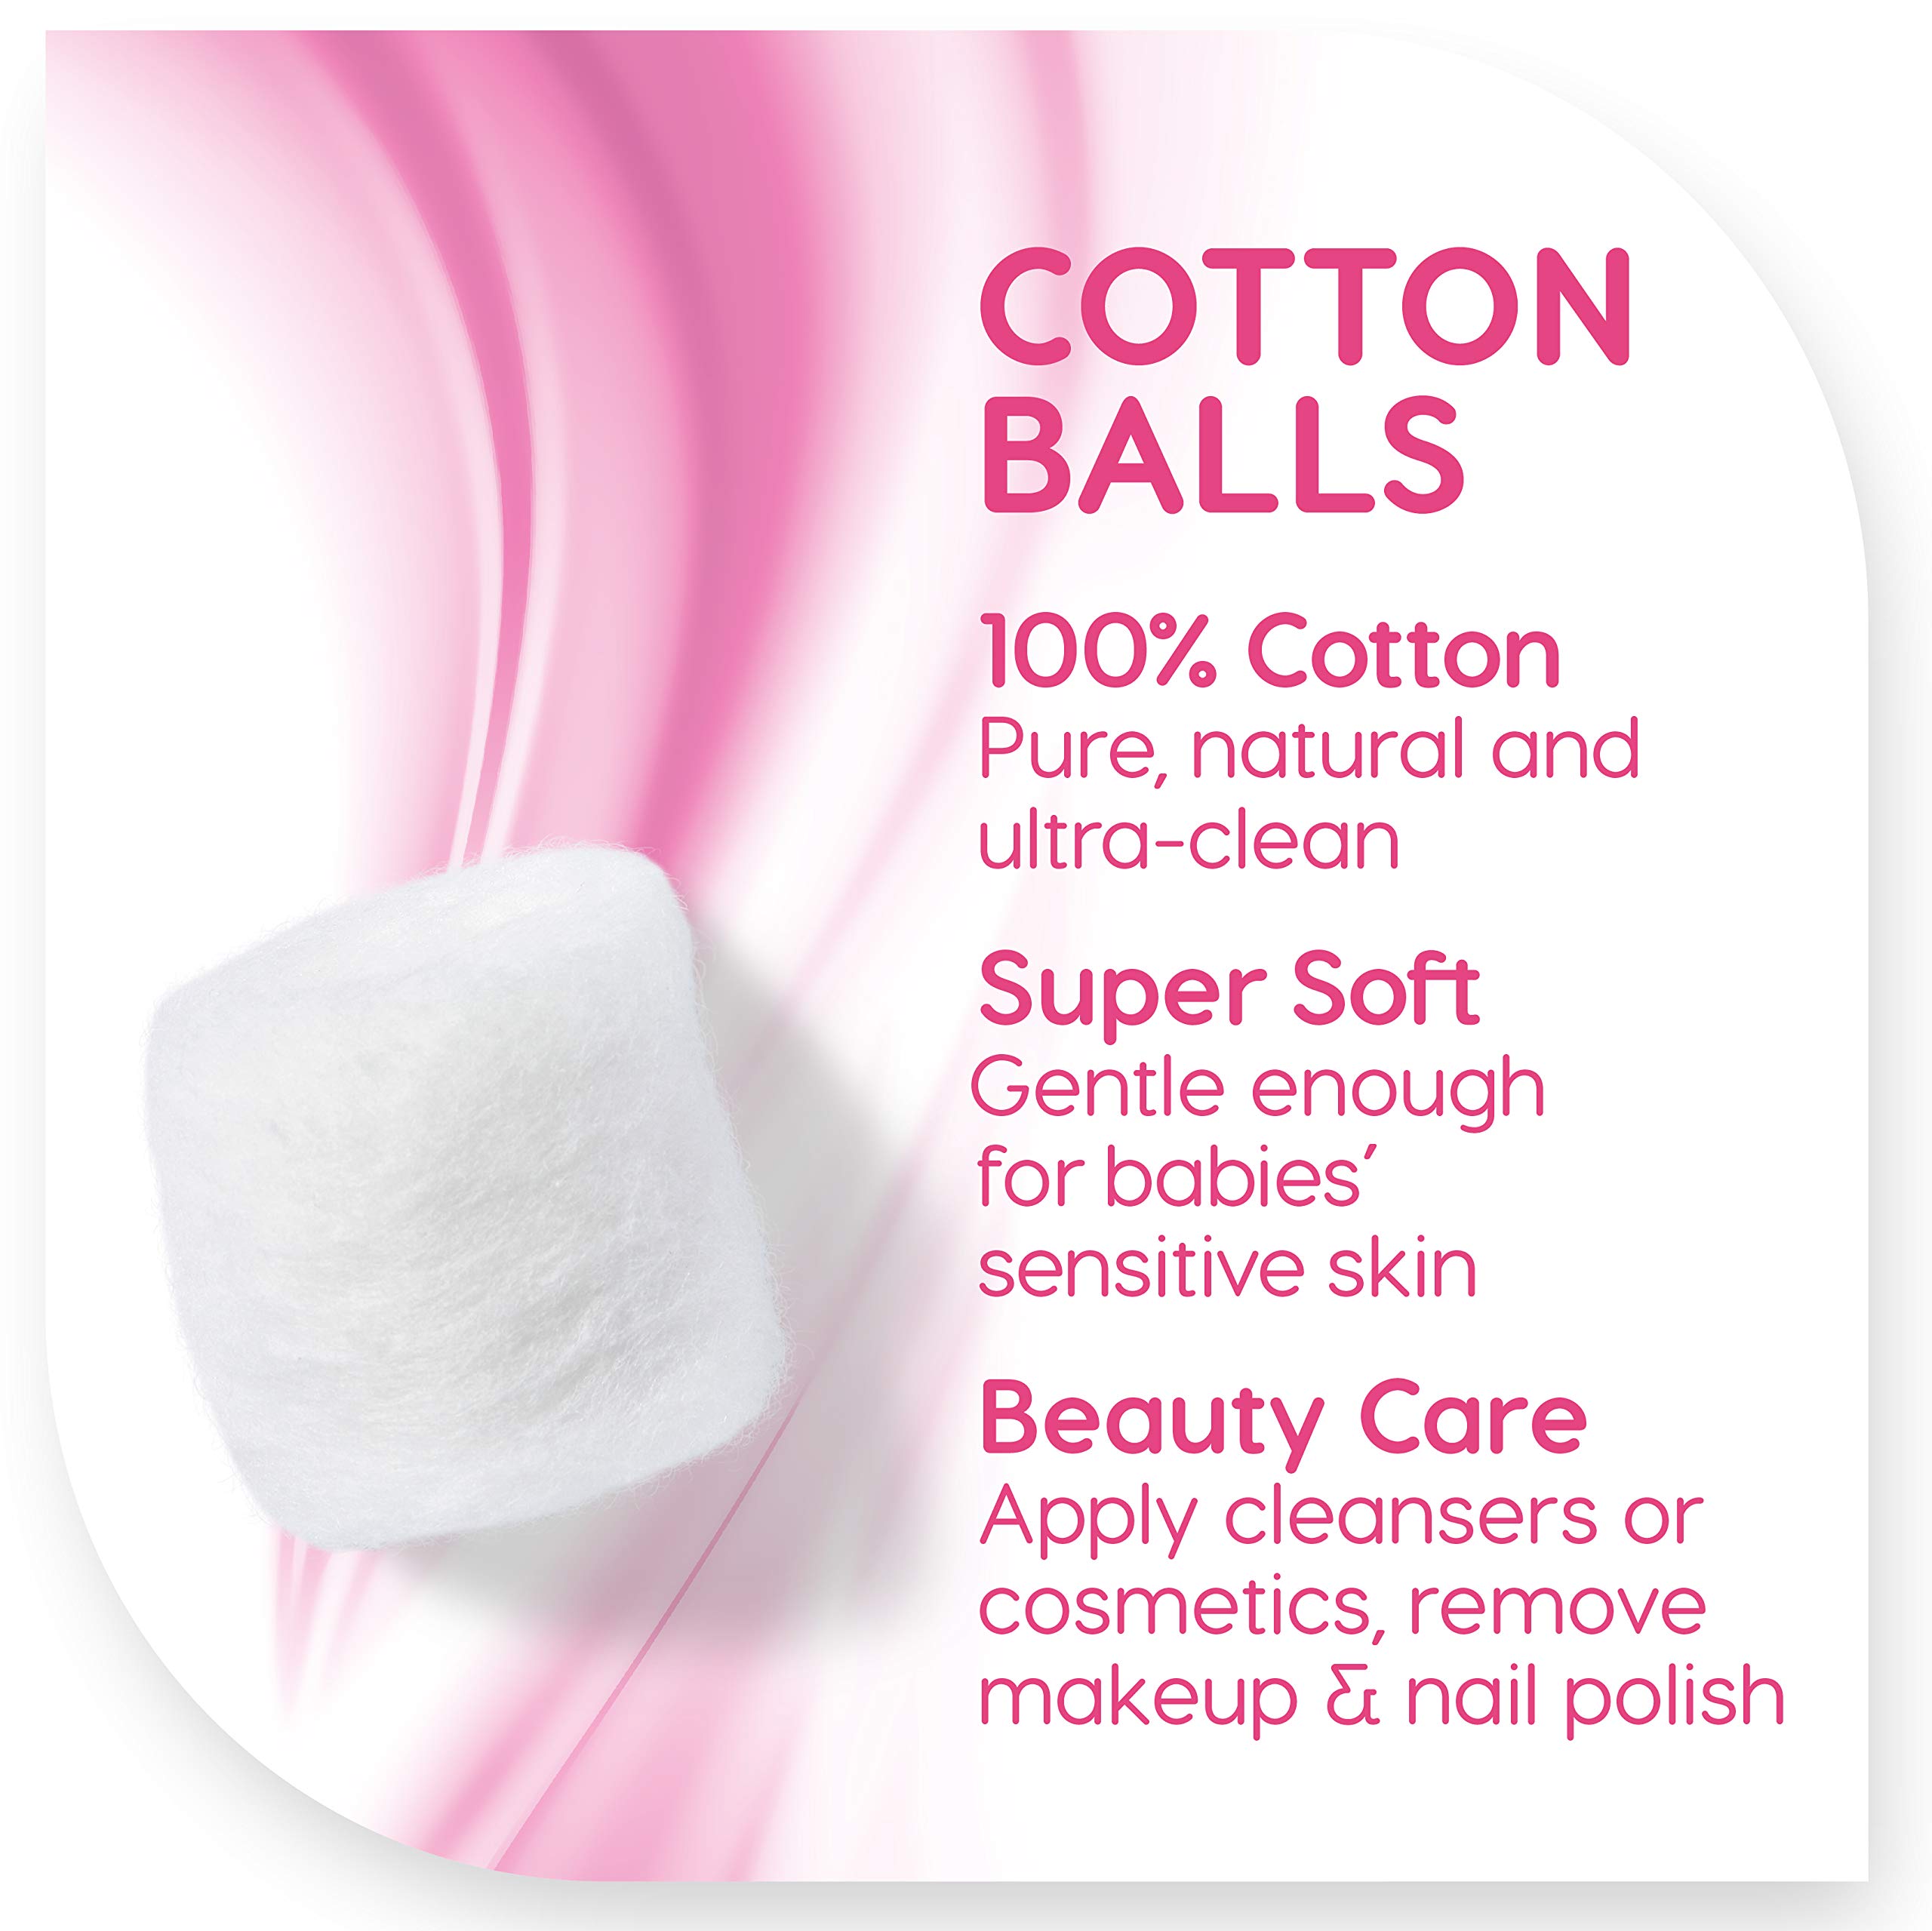 Simply Soft Premium Cotton Balls (600 Count), 100% Pure Cotton, Large Cotton Balls for Face and Nail Polish Remover